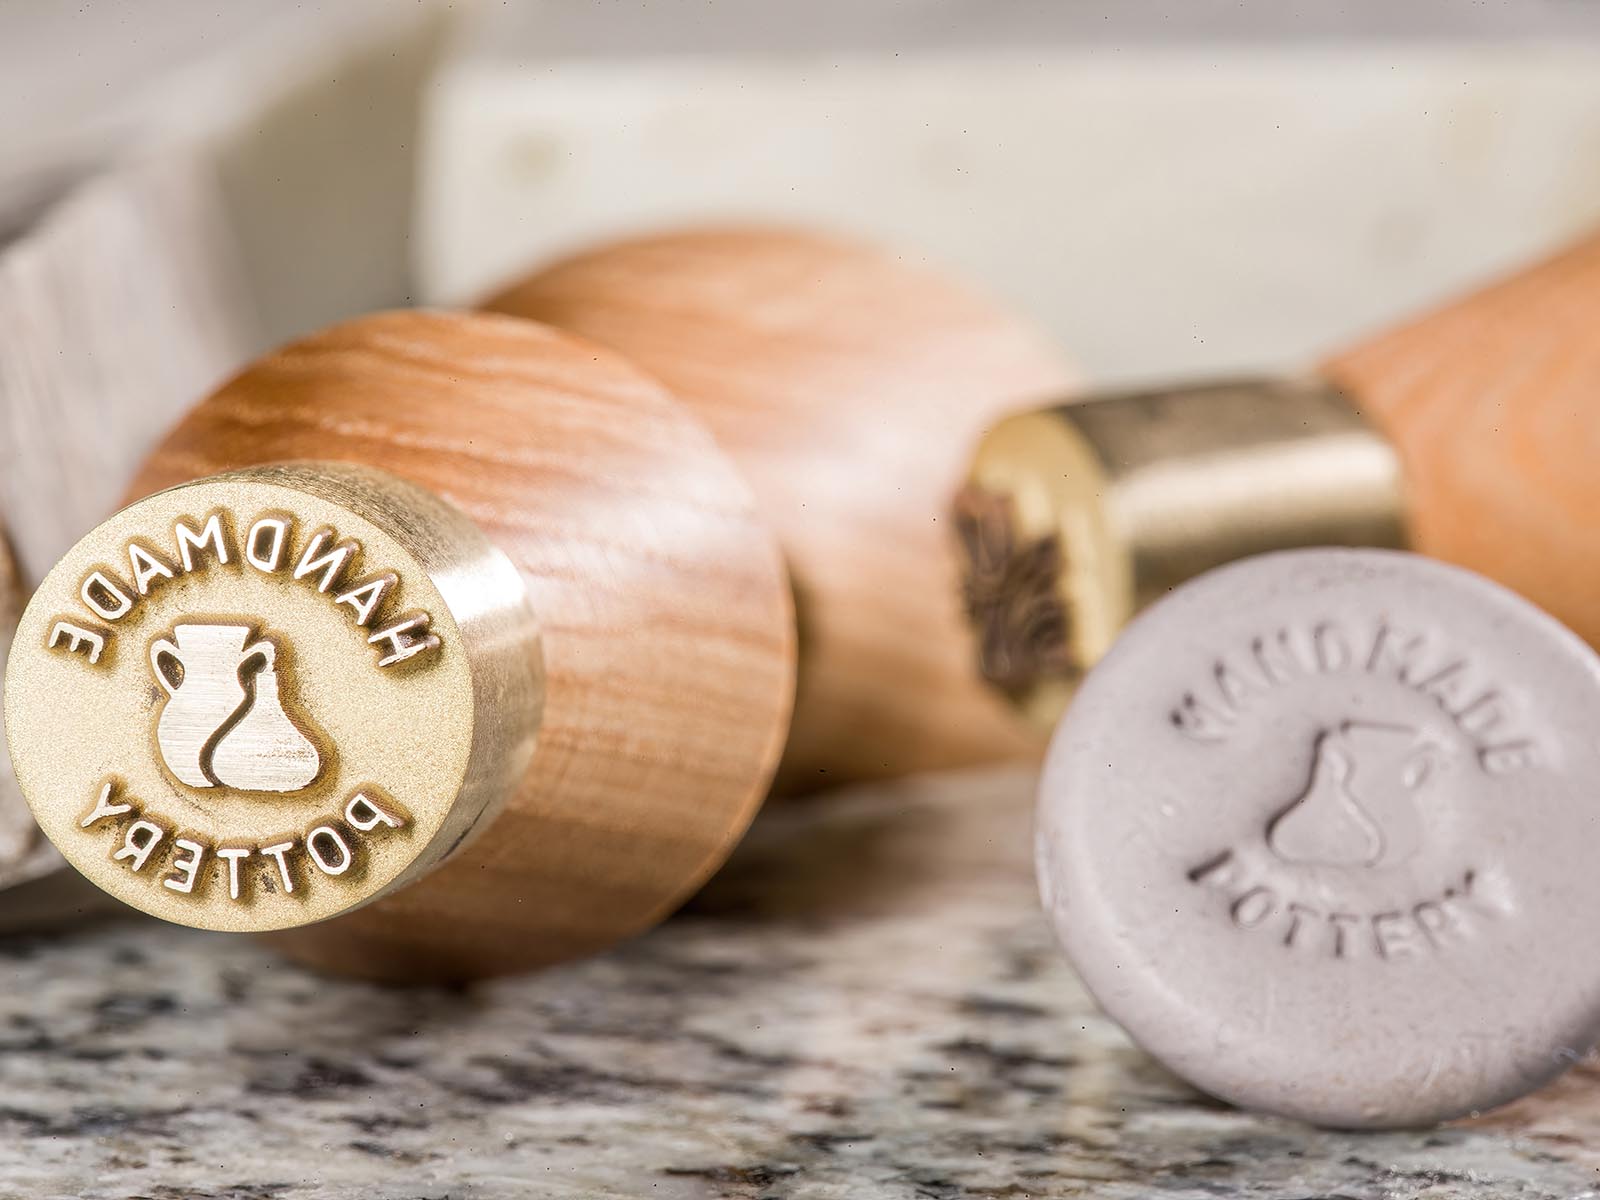 Custom Stamp for Pottery and Soap with Wooden Handle